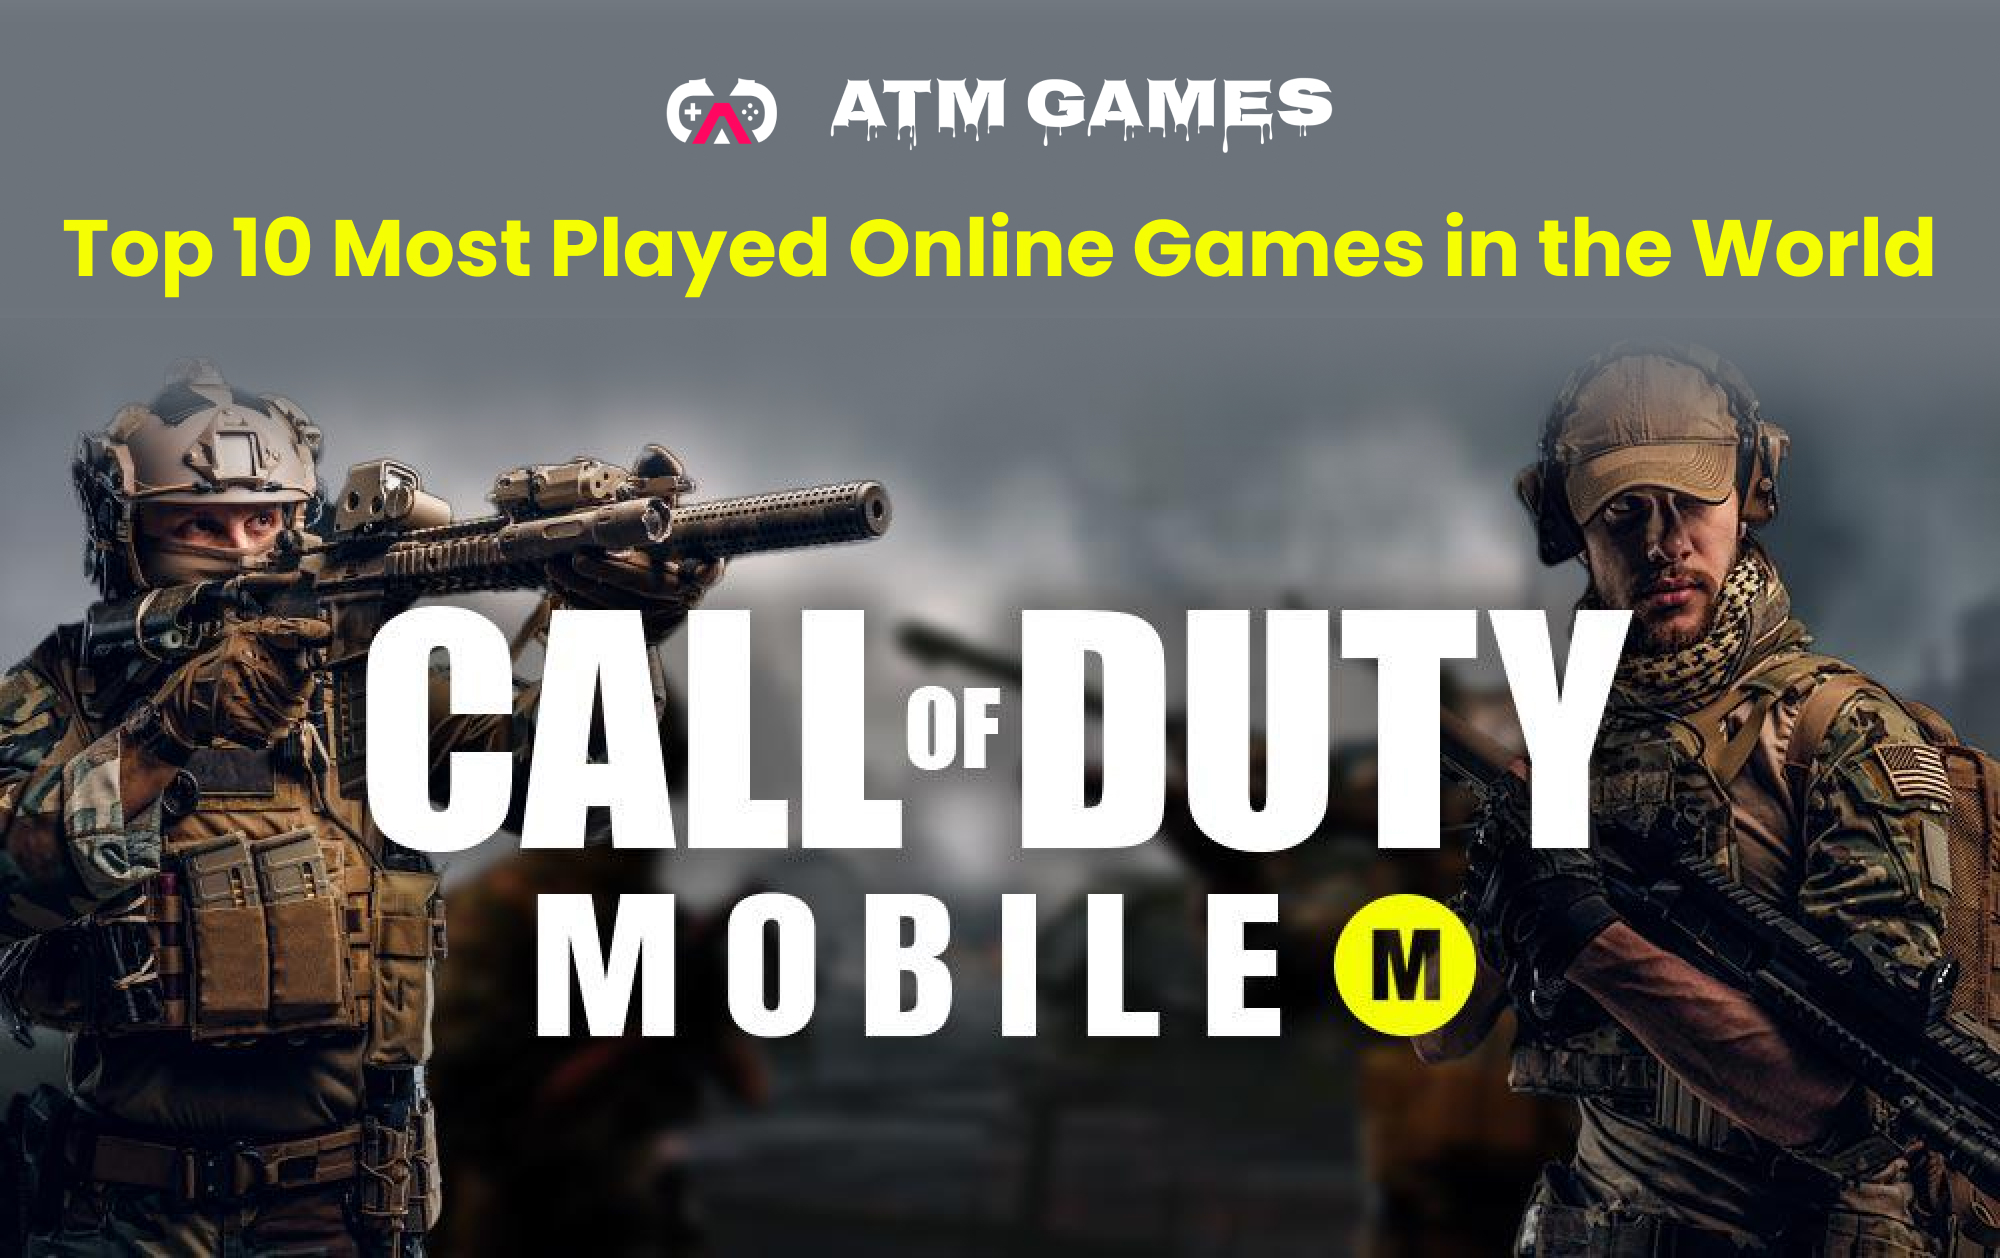 Top 10 Most Played Online Games in the World